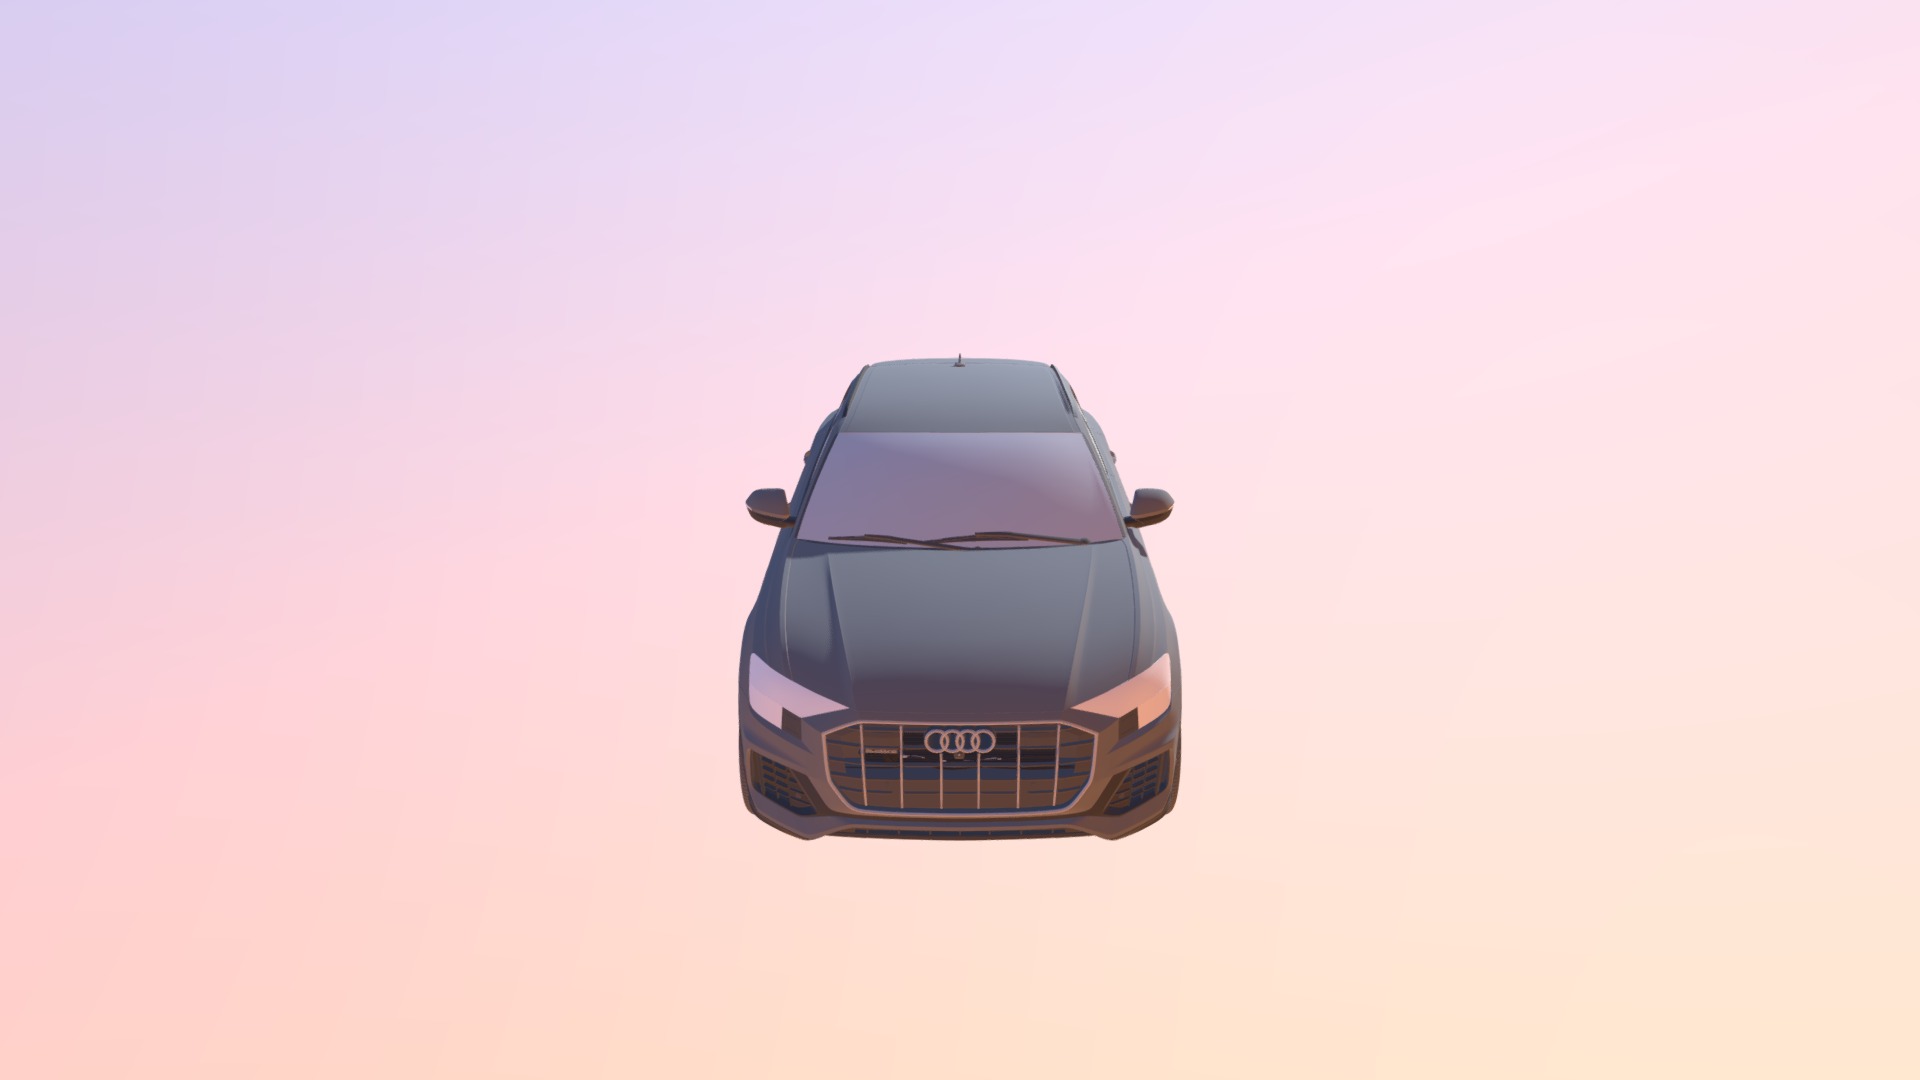 3D model Audi Q8 50 TDI Quattro 2018 - This is a 3D model of the Audi Q8 50 TDI Quattro 2018. The 3D model is about a car on a blue background.